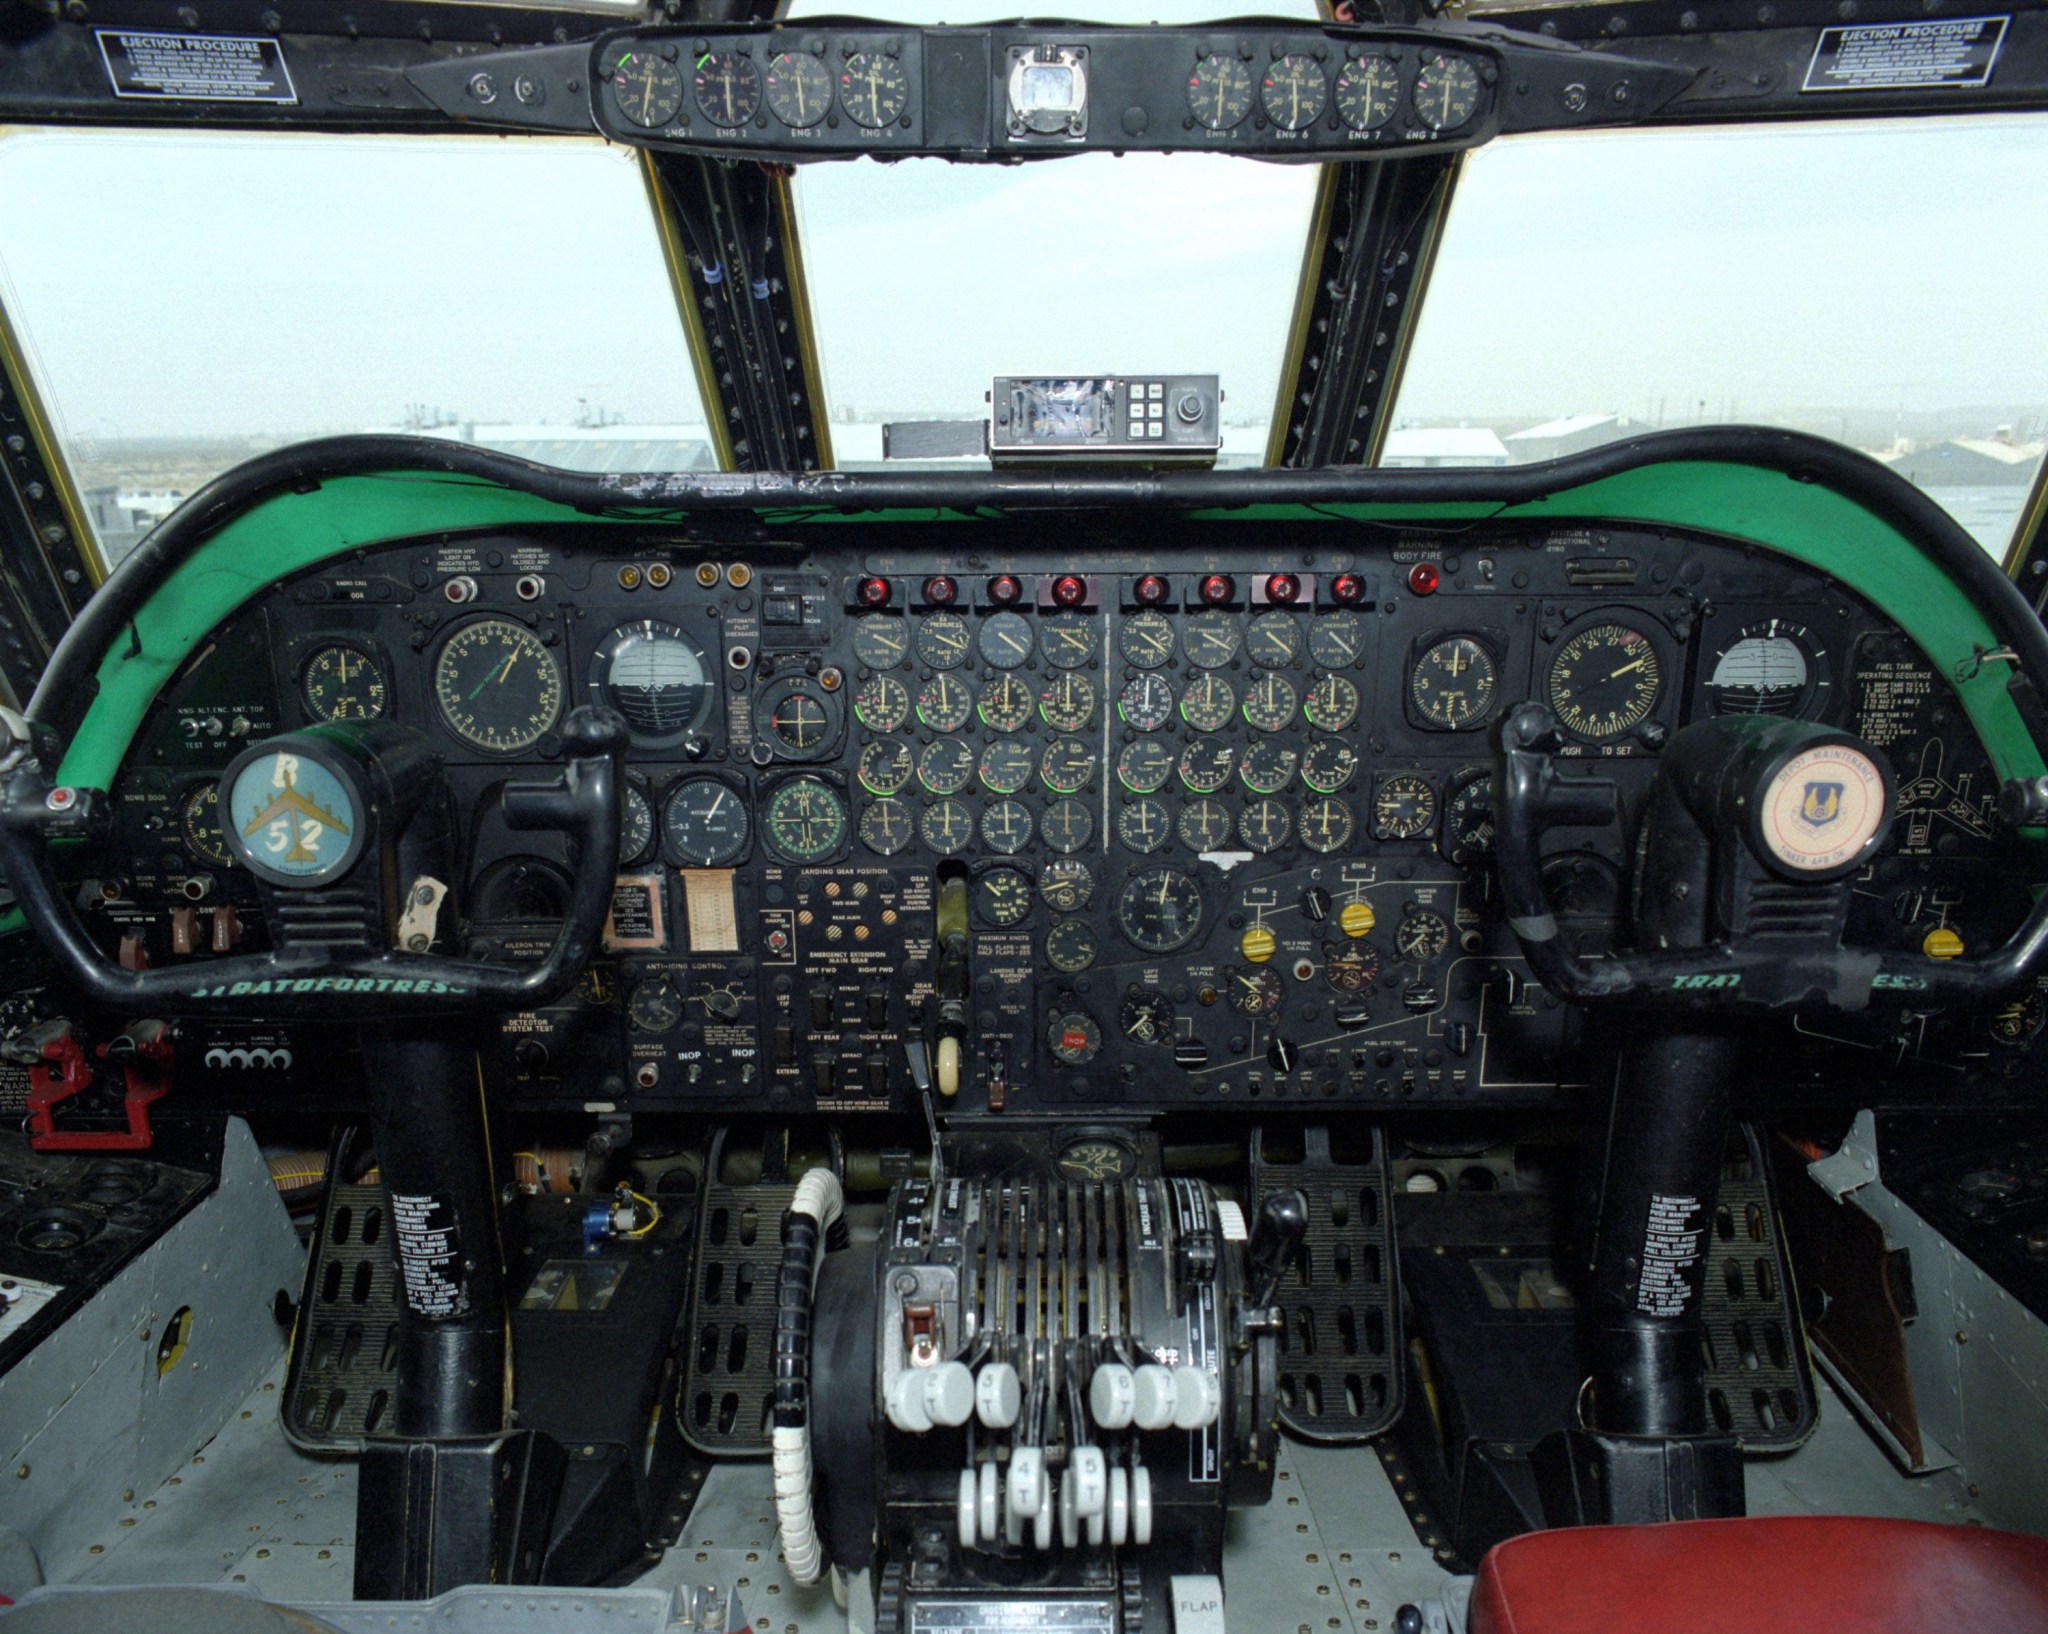 Accident investigators learned that the enormous and confusing array of dials and gauges in older aircraft cockpits were sometim